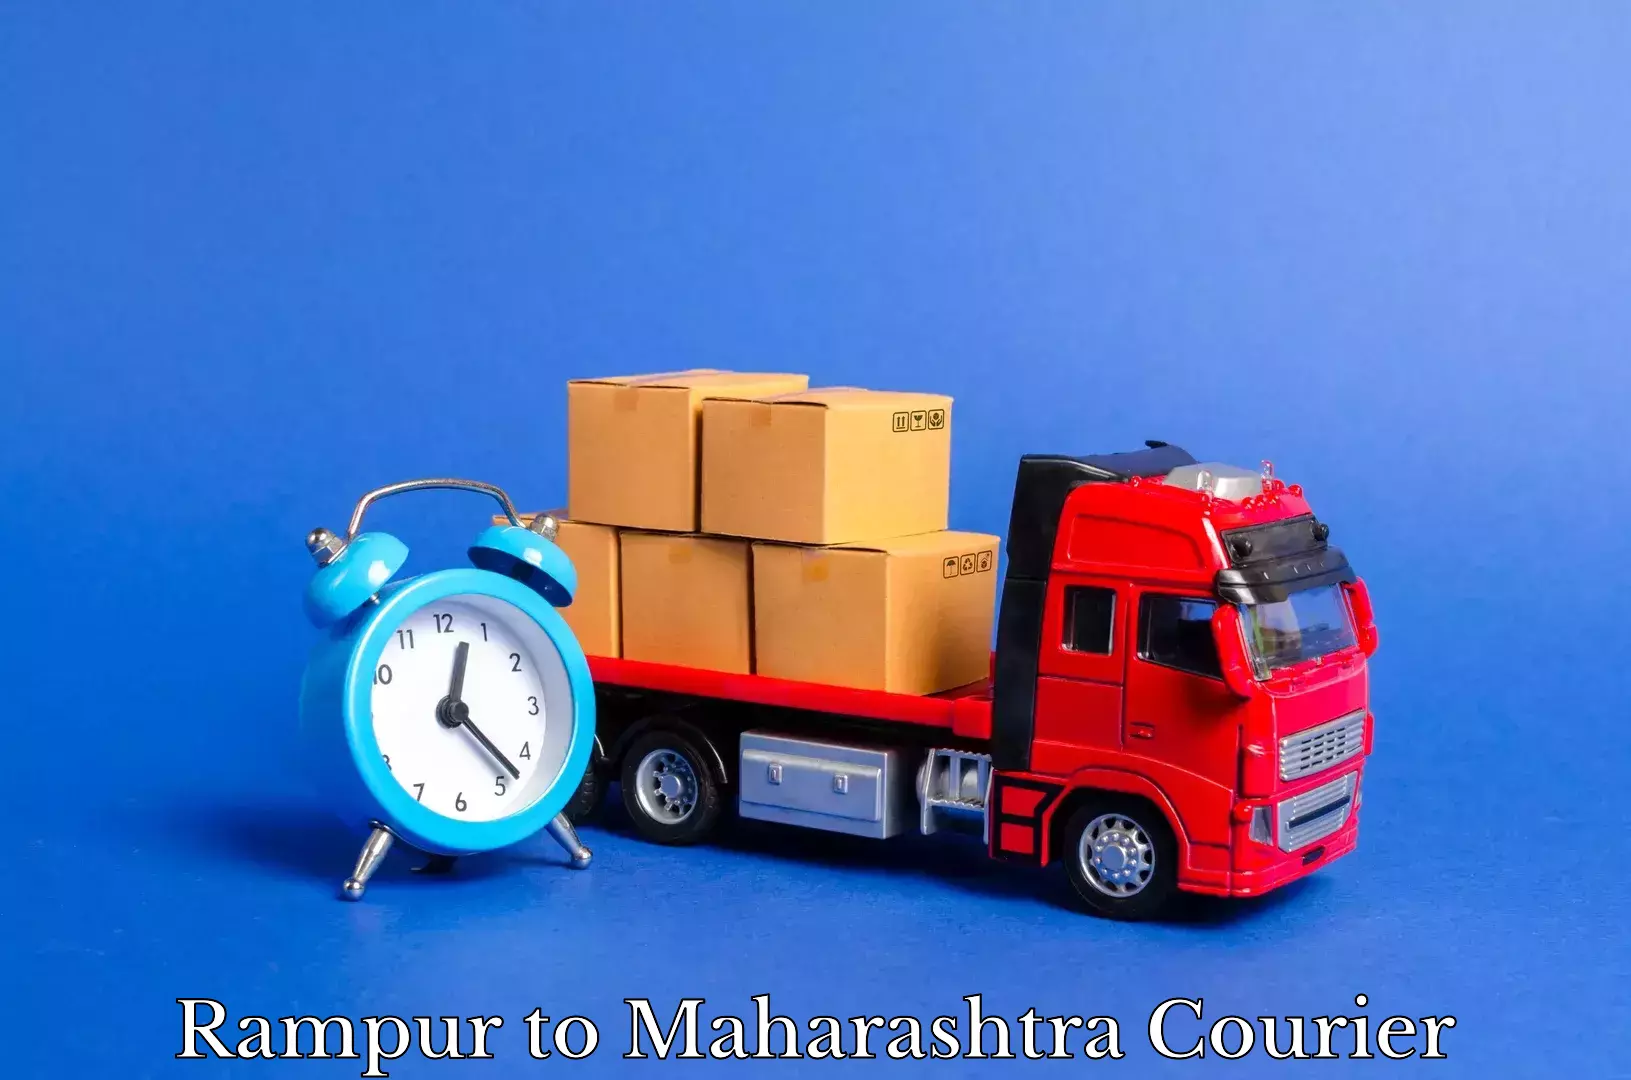 Reliable moving assistance Rampur to Osmanabad